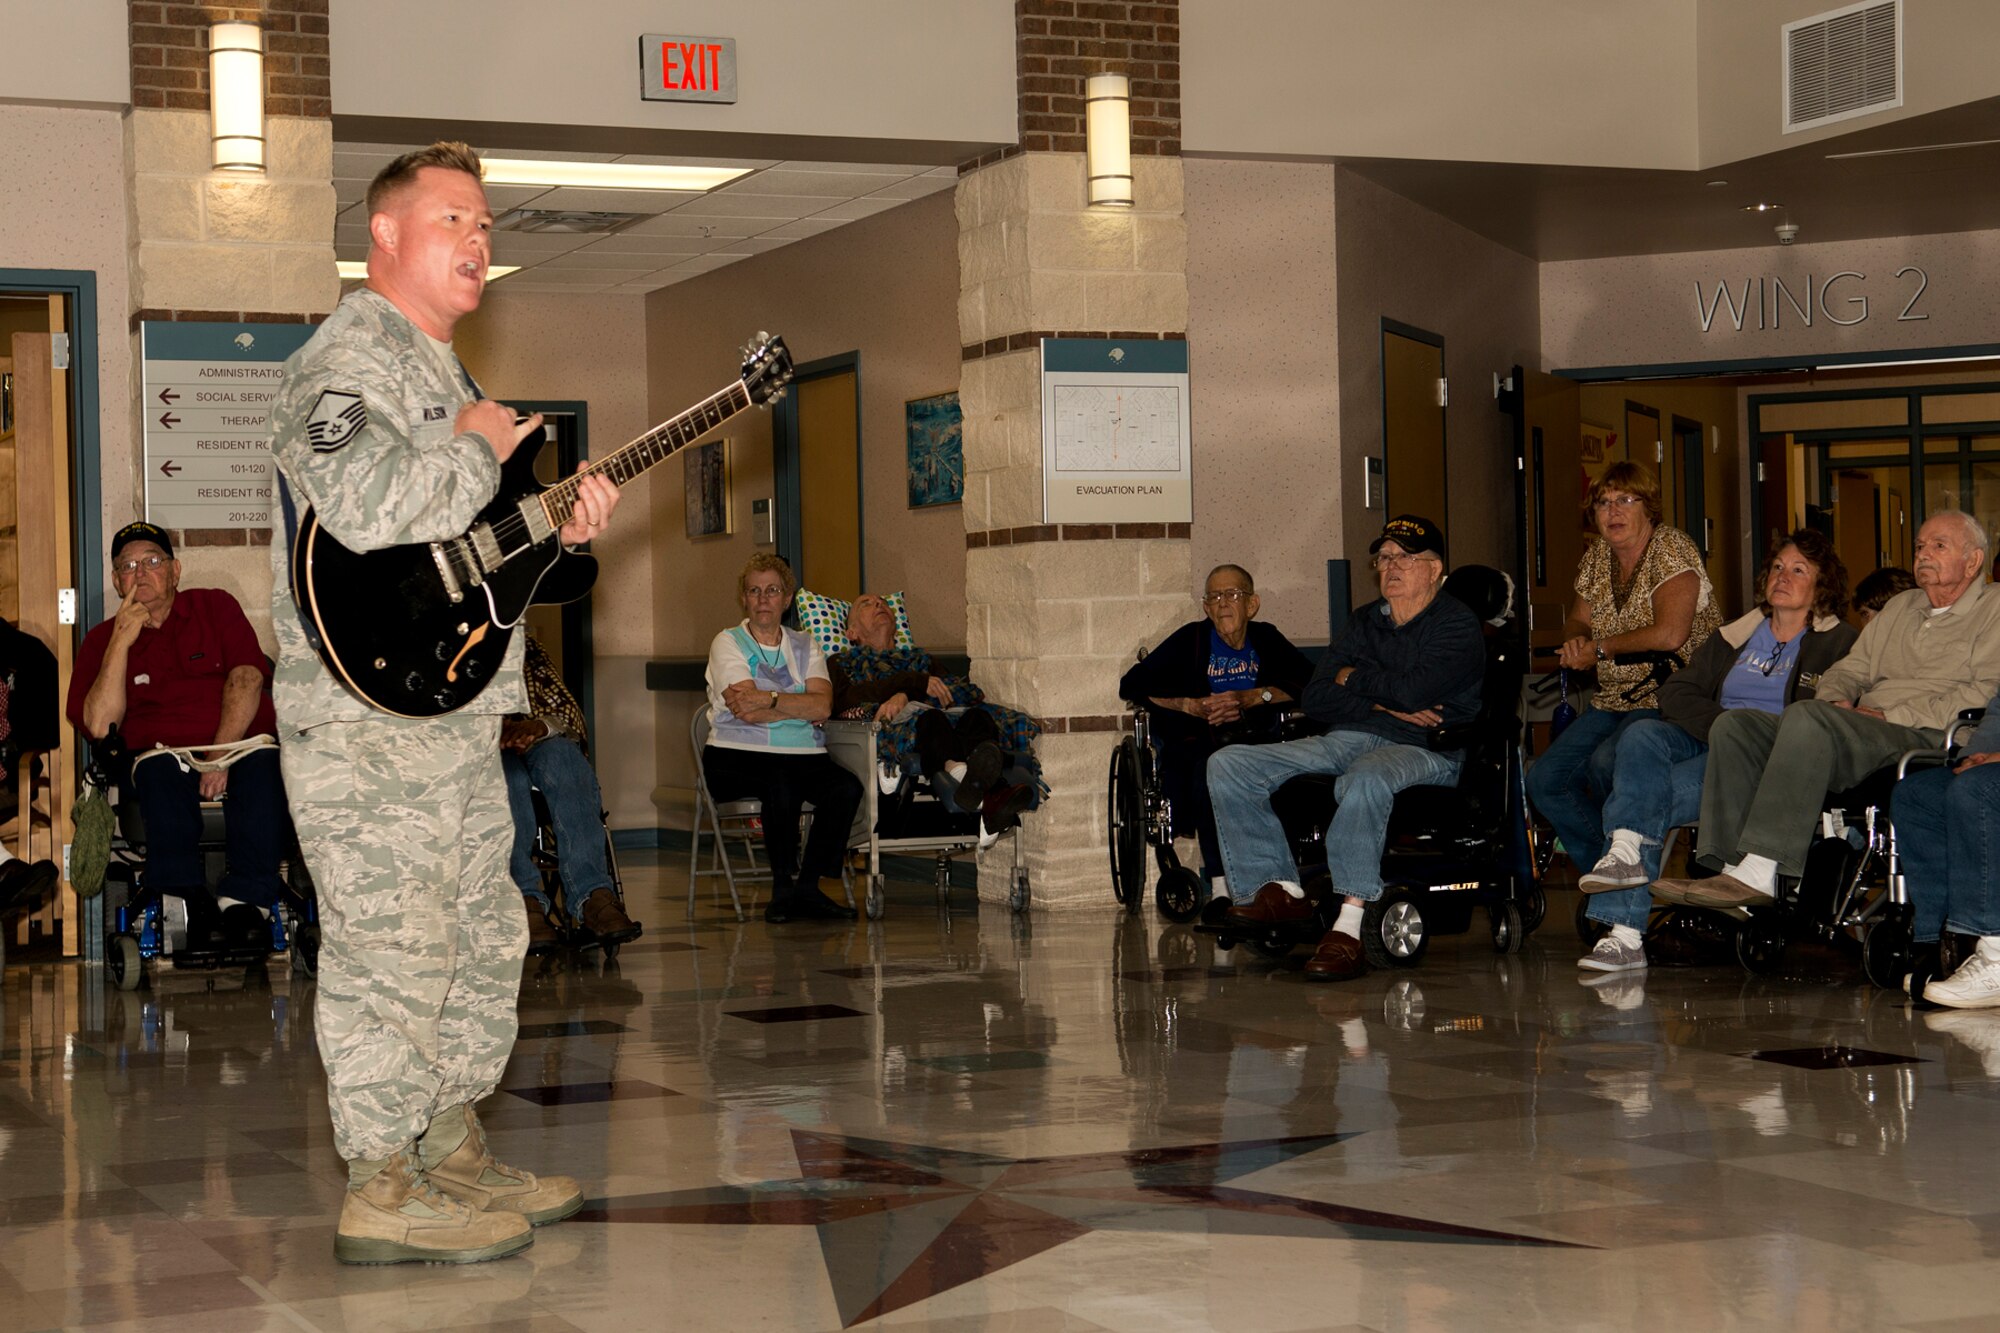 U.S. Air Force Master Sgt. Steve Wilson talks to a group of veterans at the Northwest Louisiana Veterans Home, Nov. 6, 2012, Bossier City, La. Wilson is a member of the U.S. Air Force Band of the West and his ensemble  visited the veterans home, performing songs from the 20s, 30s and 40s. (U.S. Air Force photo by Master Sgt. Greg Steele/Released)